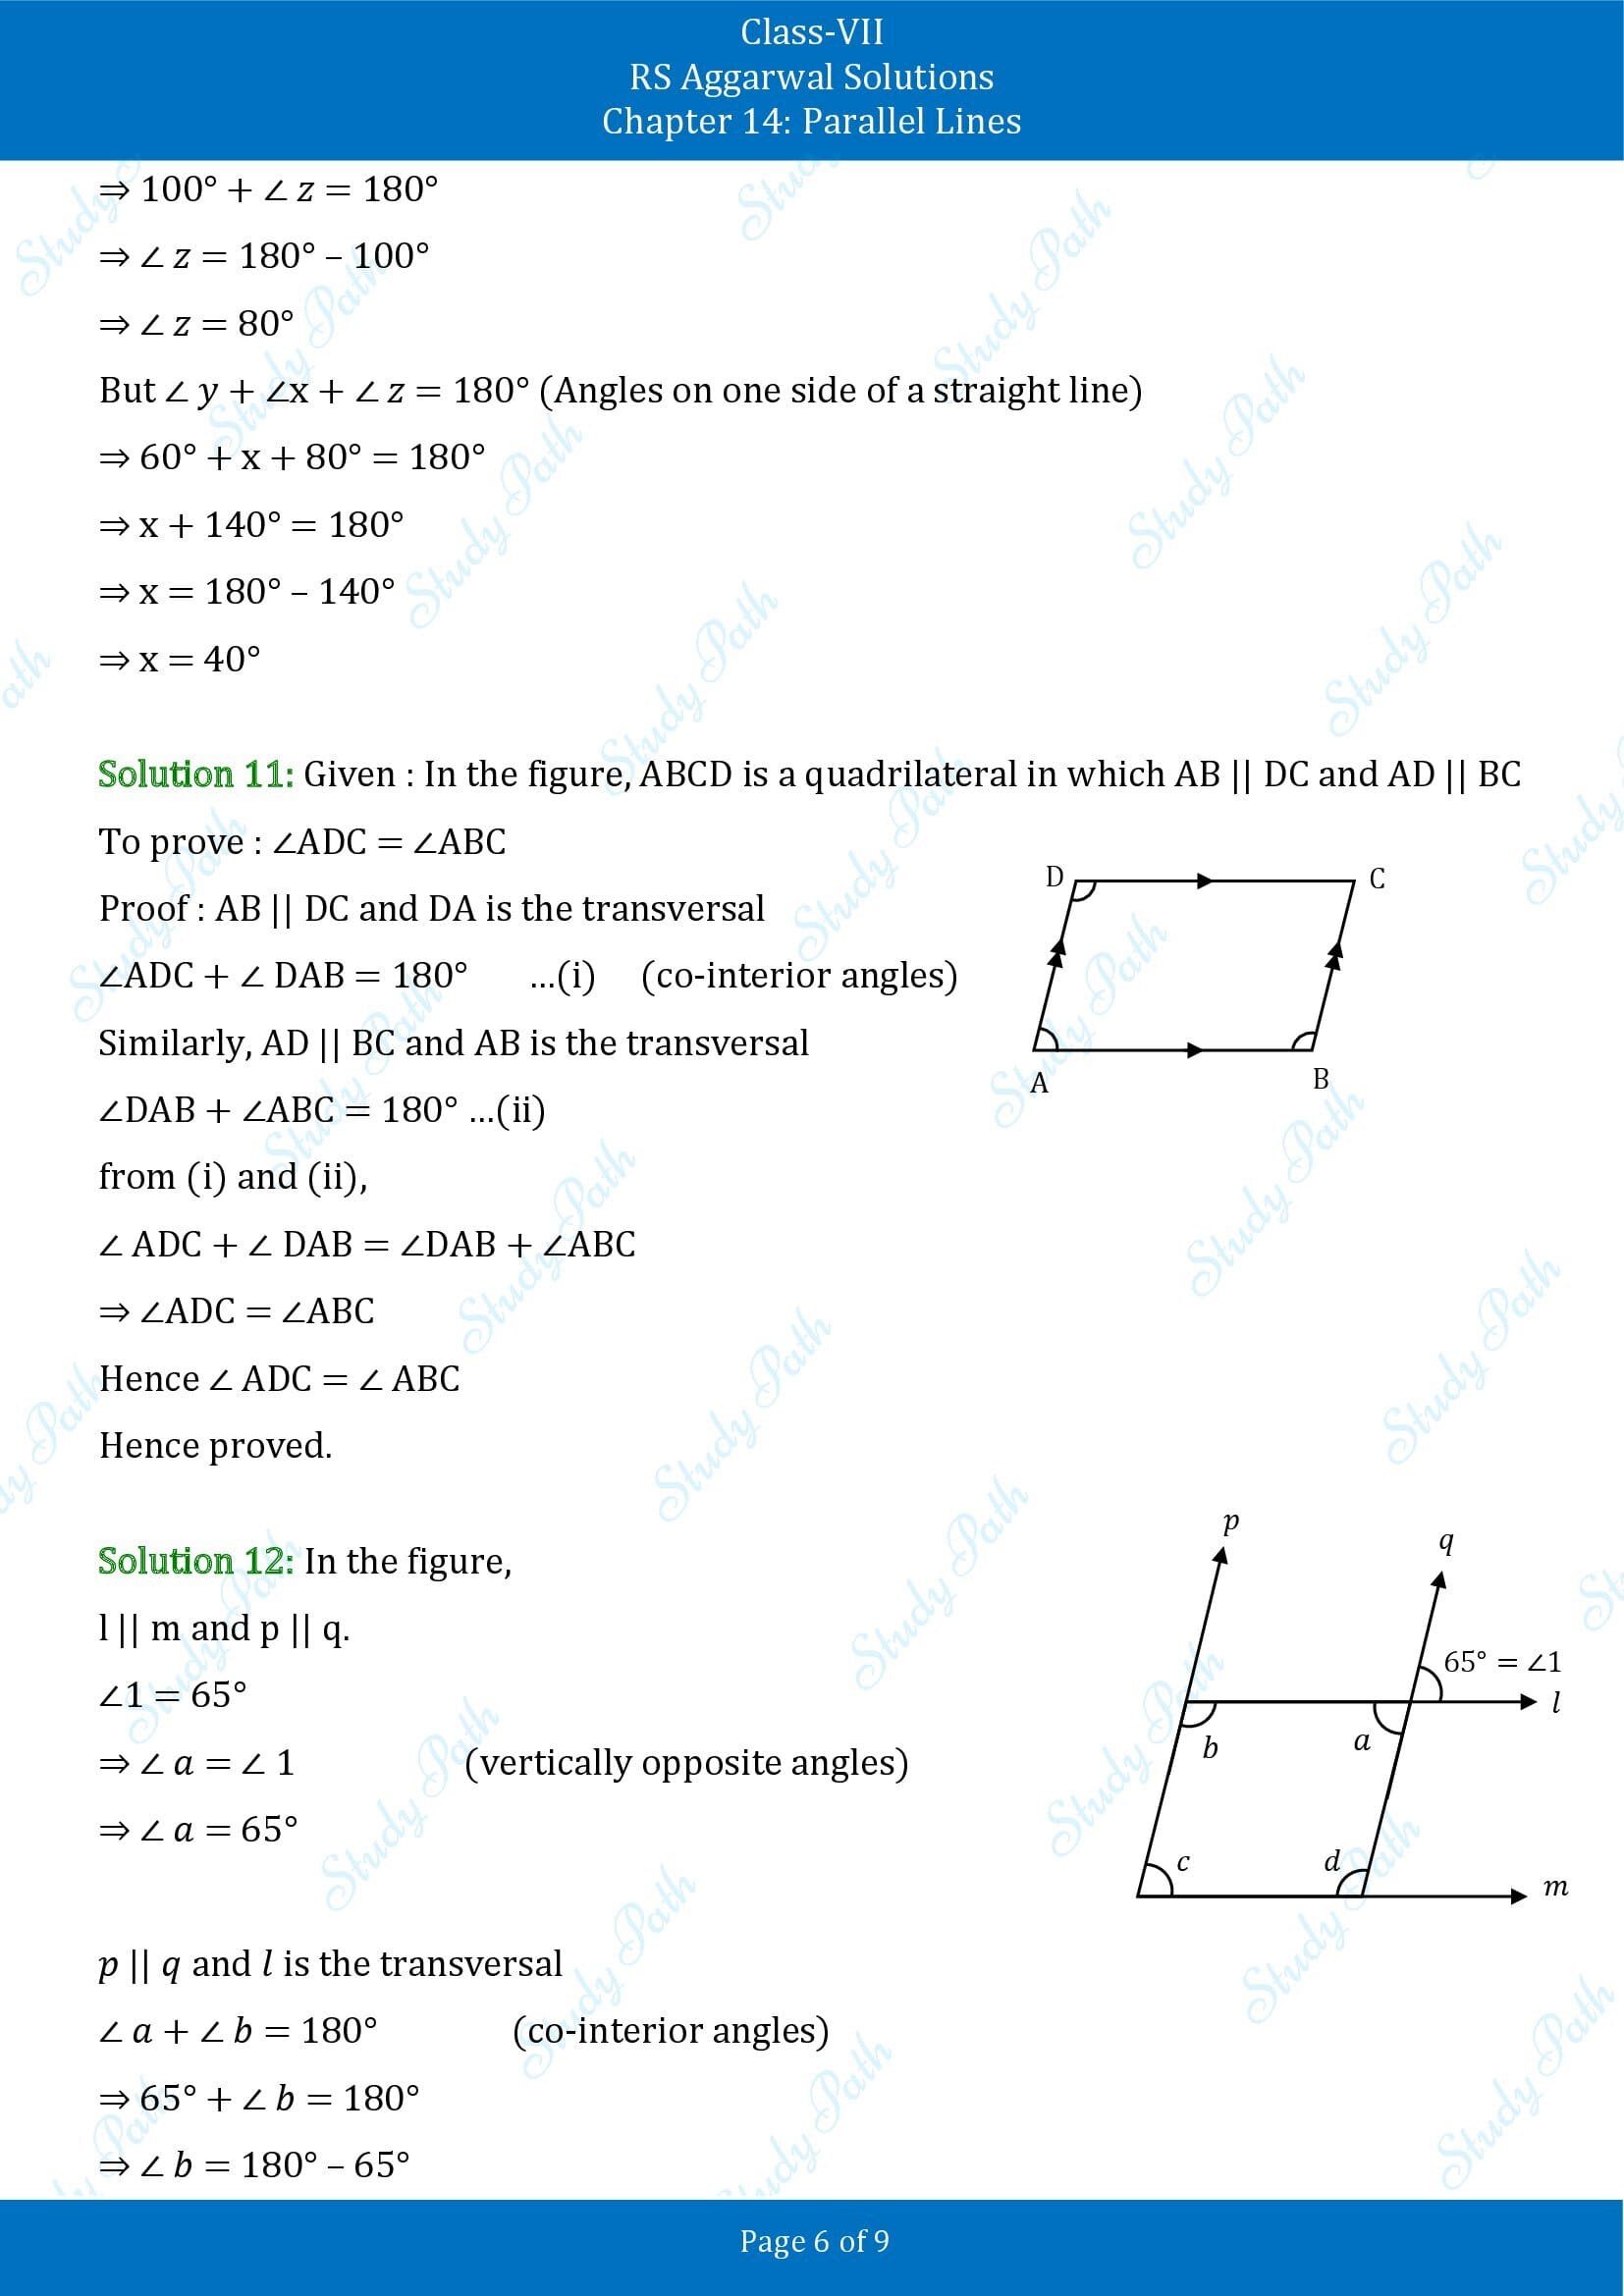 RS Aggarwal Solutions Class 7 Chapter 14 Parallel Lines 00006